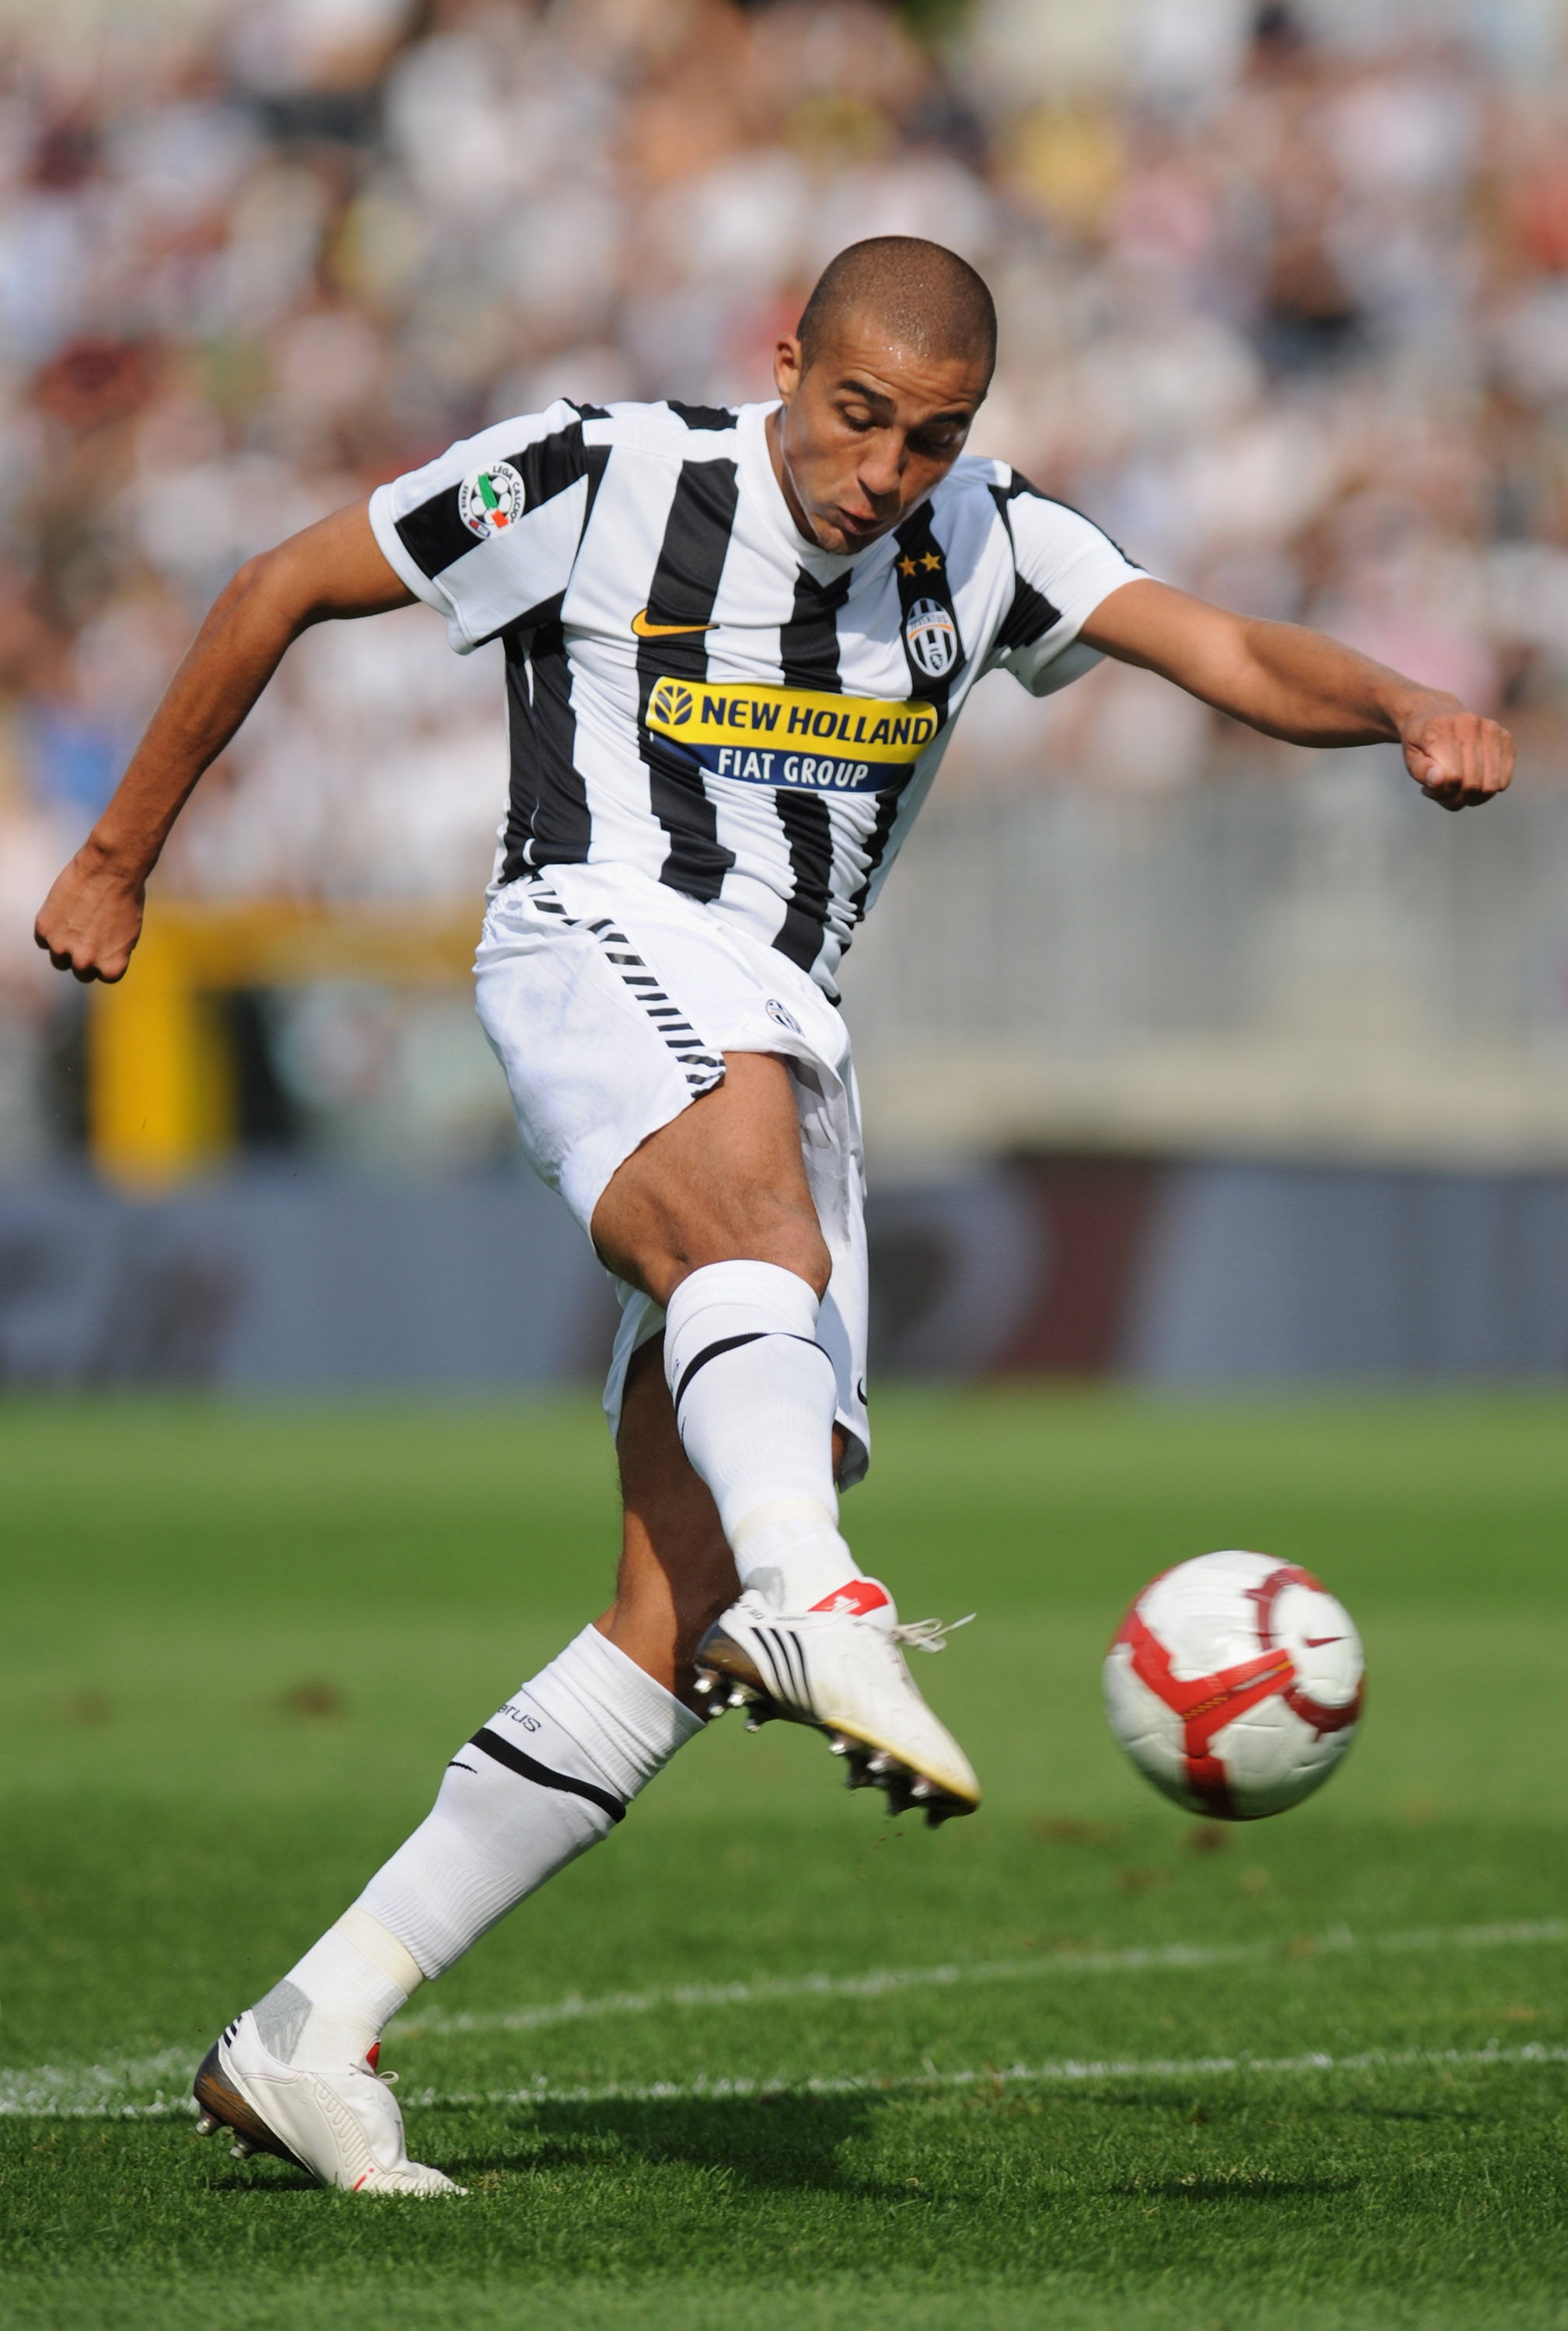 TURIN, ITALY - SEPTEMBER 27:  David Trezeguet of Juventus FC in action during the Serie A match between Juventus FC and Bologna FC at Olimpico Stadium on September 27, 2009 in Turin, Italy.  (Photo by Valerio Pennicino/Getty Images)